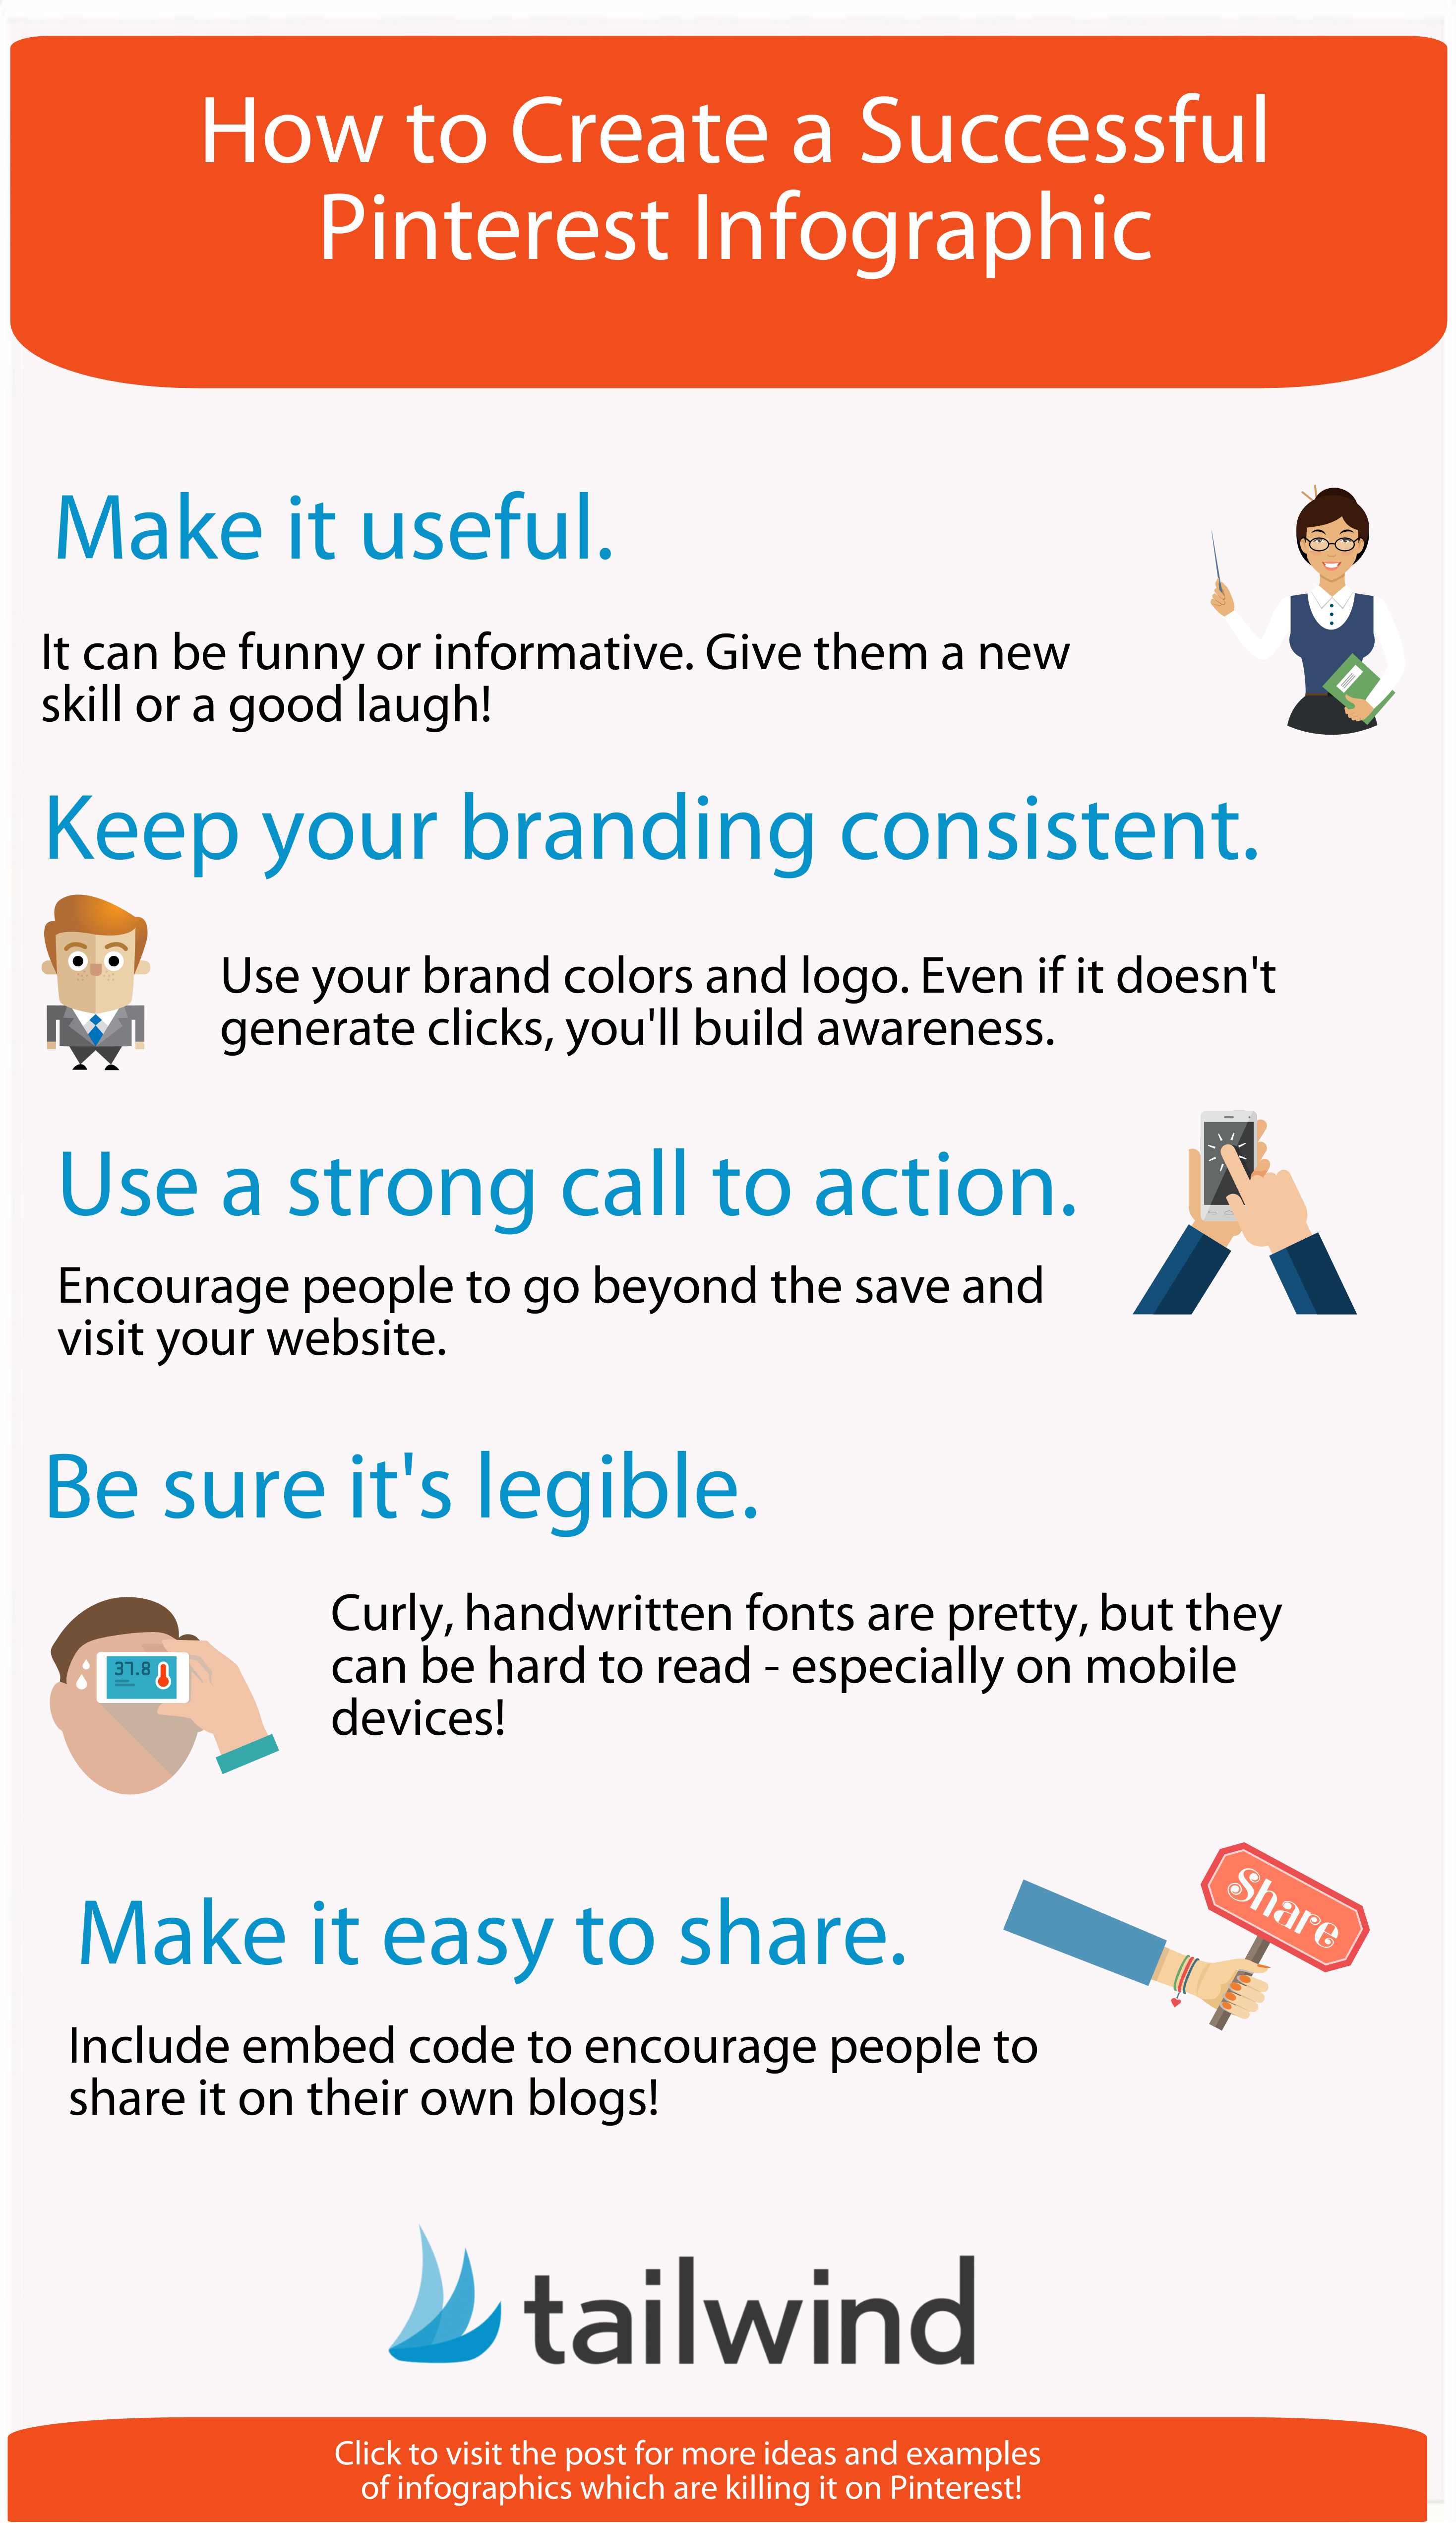 How to Create a Successful Pinterest Infographic